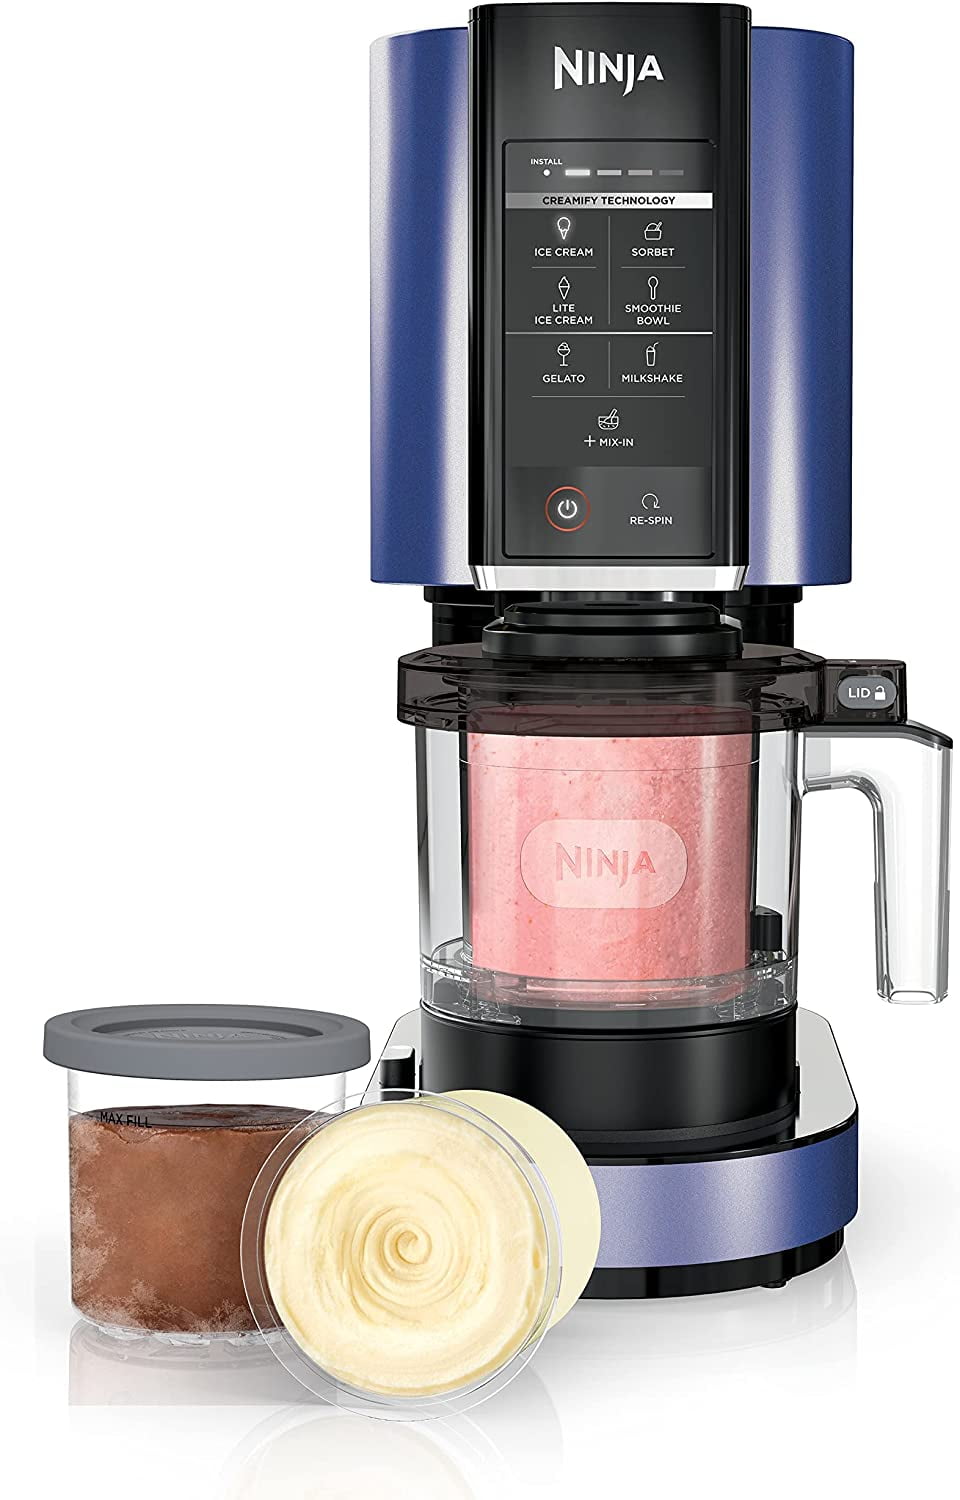 Ninja CN301CO CREAMi Ice Cream Maker, for Gelato, Mix-ins, Milkshakes,  Sorbet, Smoothie Bowls & More, 7 One-Touch Programs, with (3) Pint  Containers 